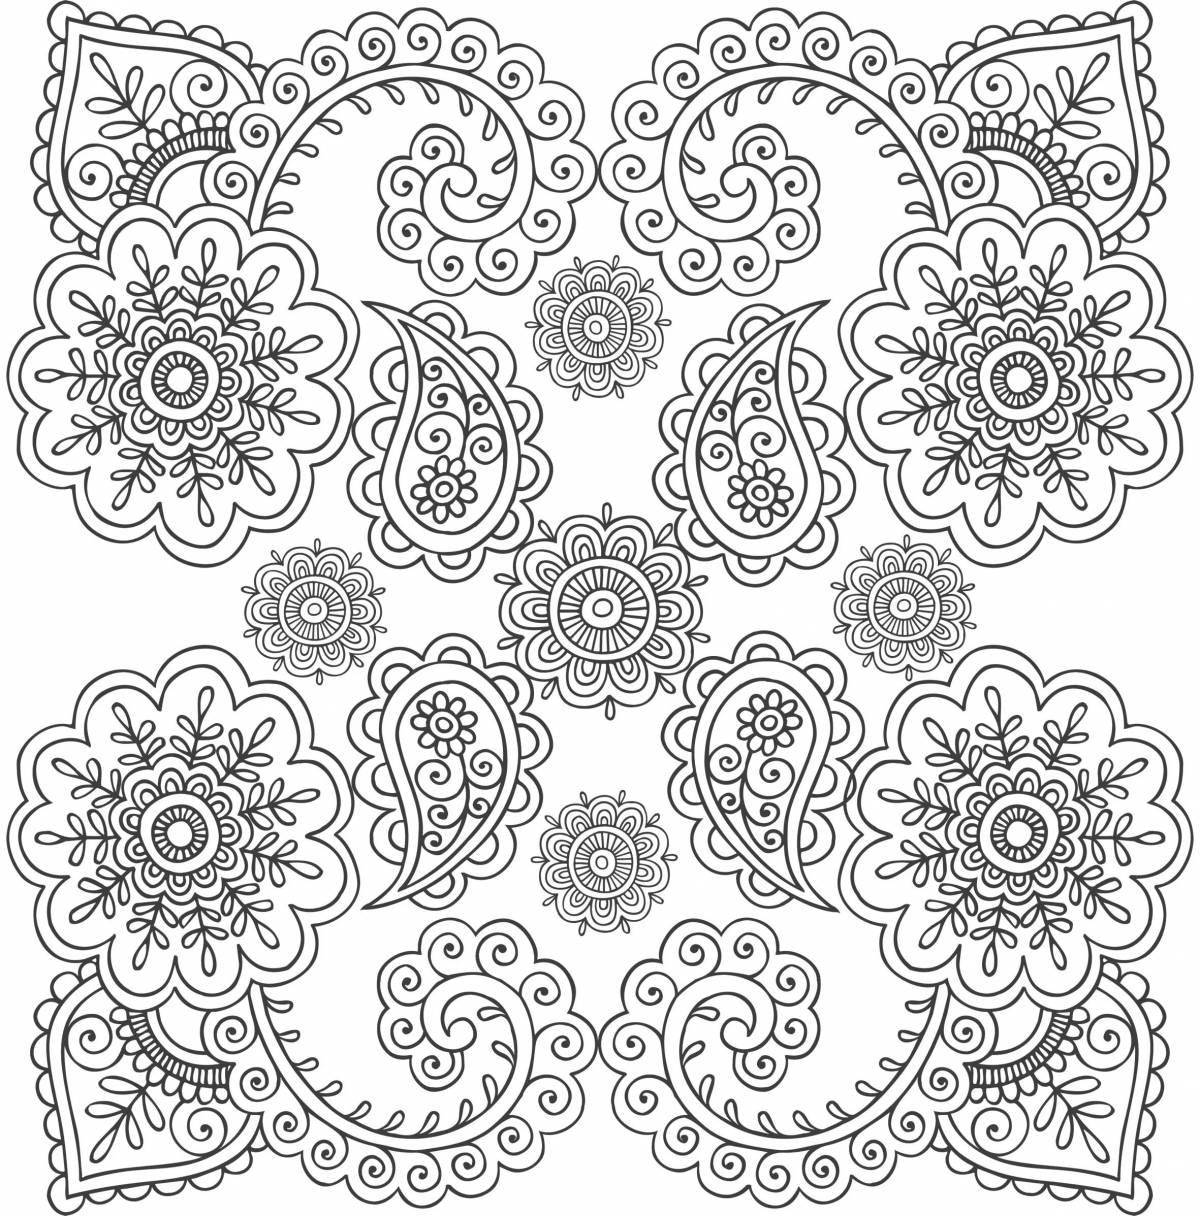 Ray pattern coloring book